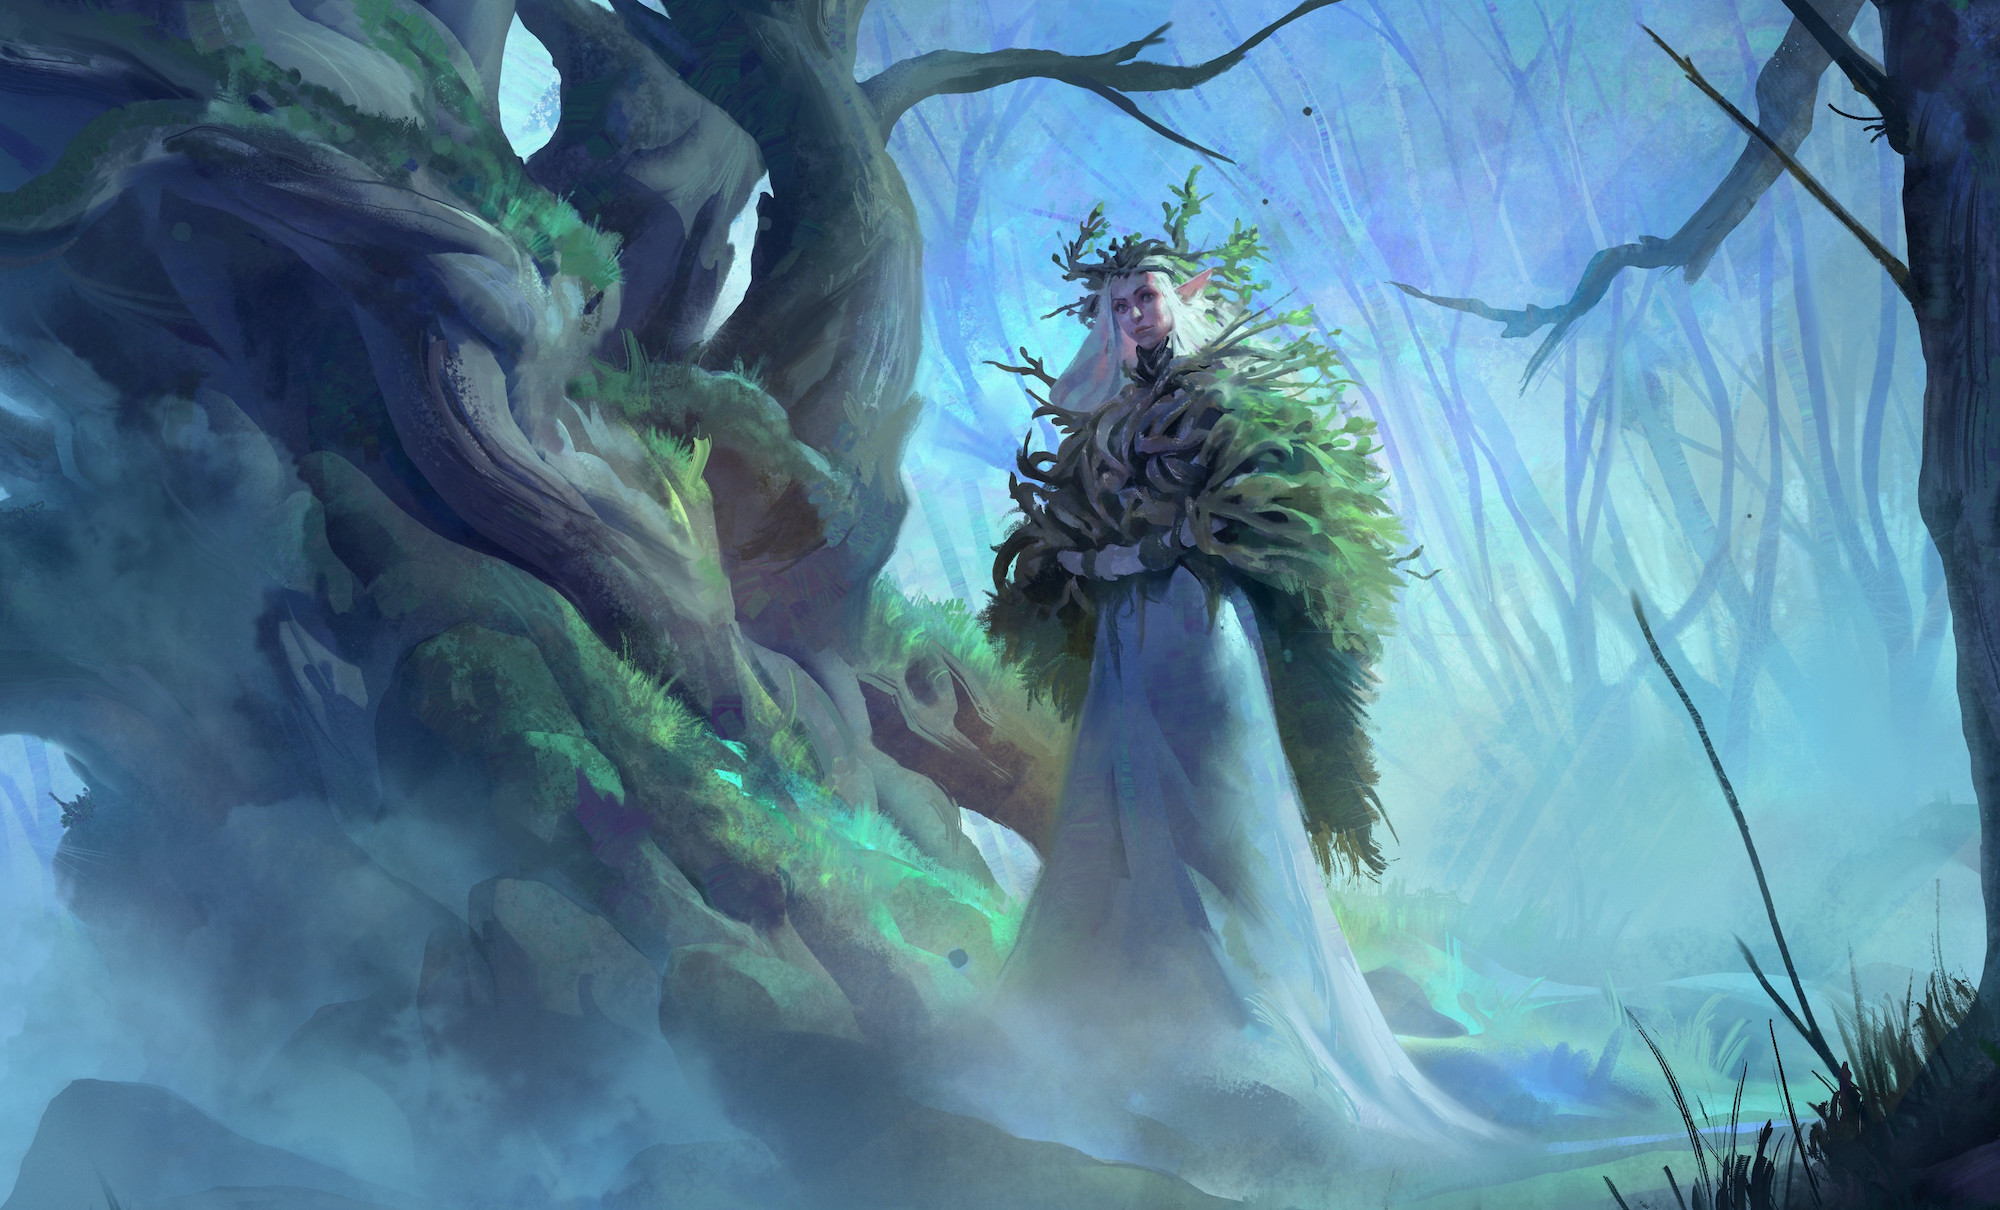 A wood elf crowned in twigs looks at the camera from a foggy forest